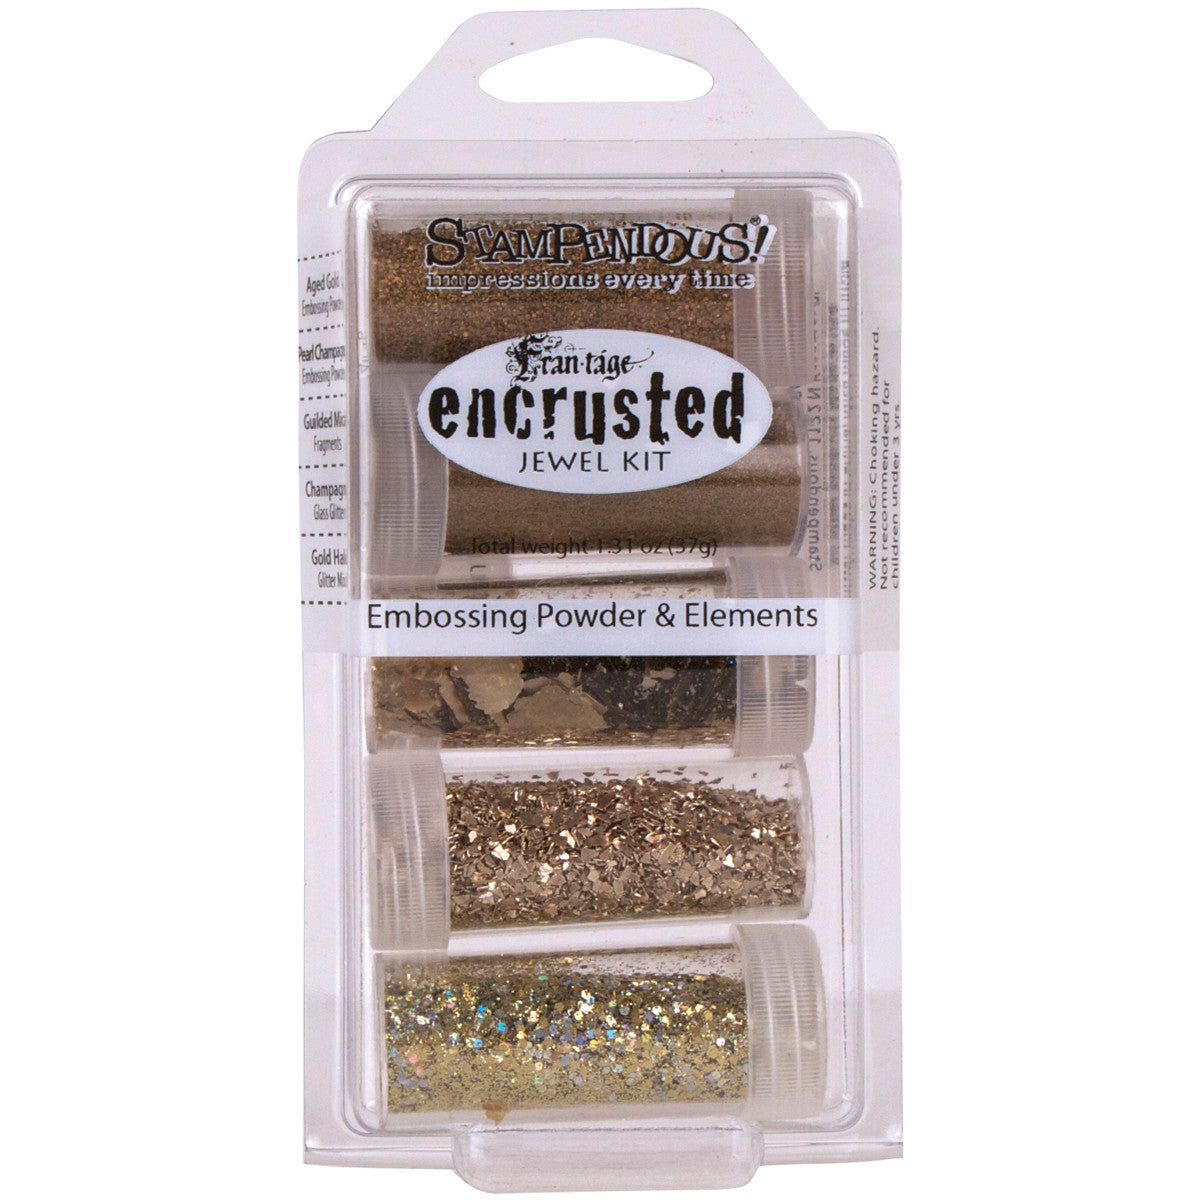 Stampendous Frantage Encrusted Jewel Gold Embossing Powder and Elements Kit